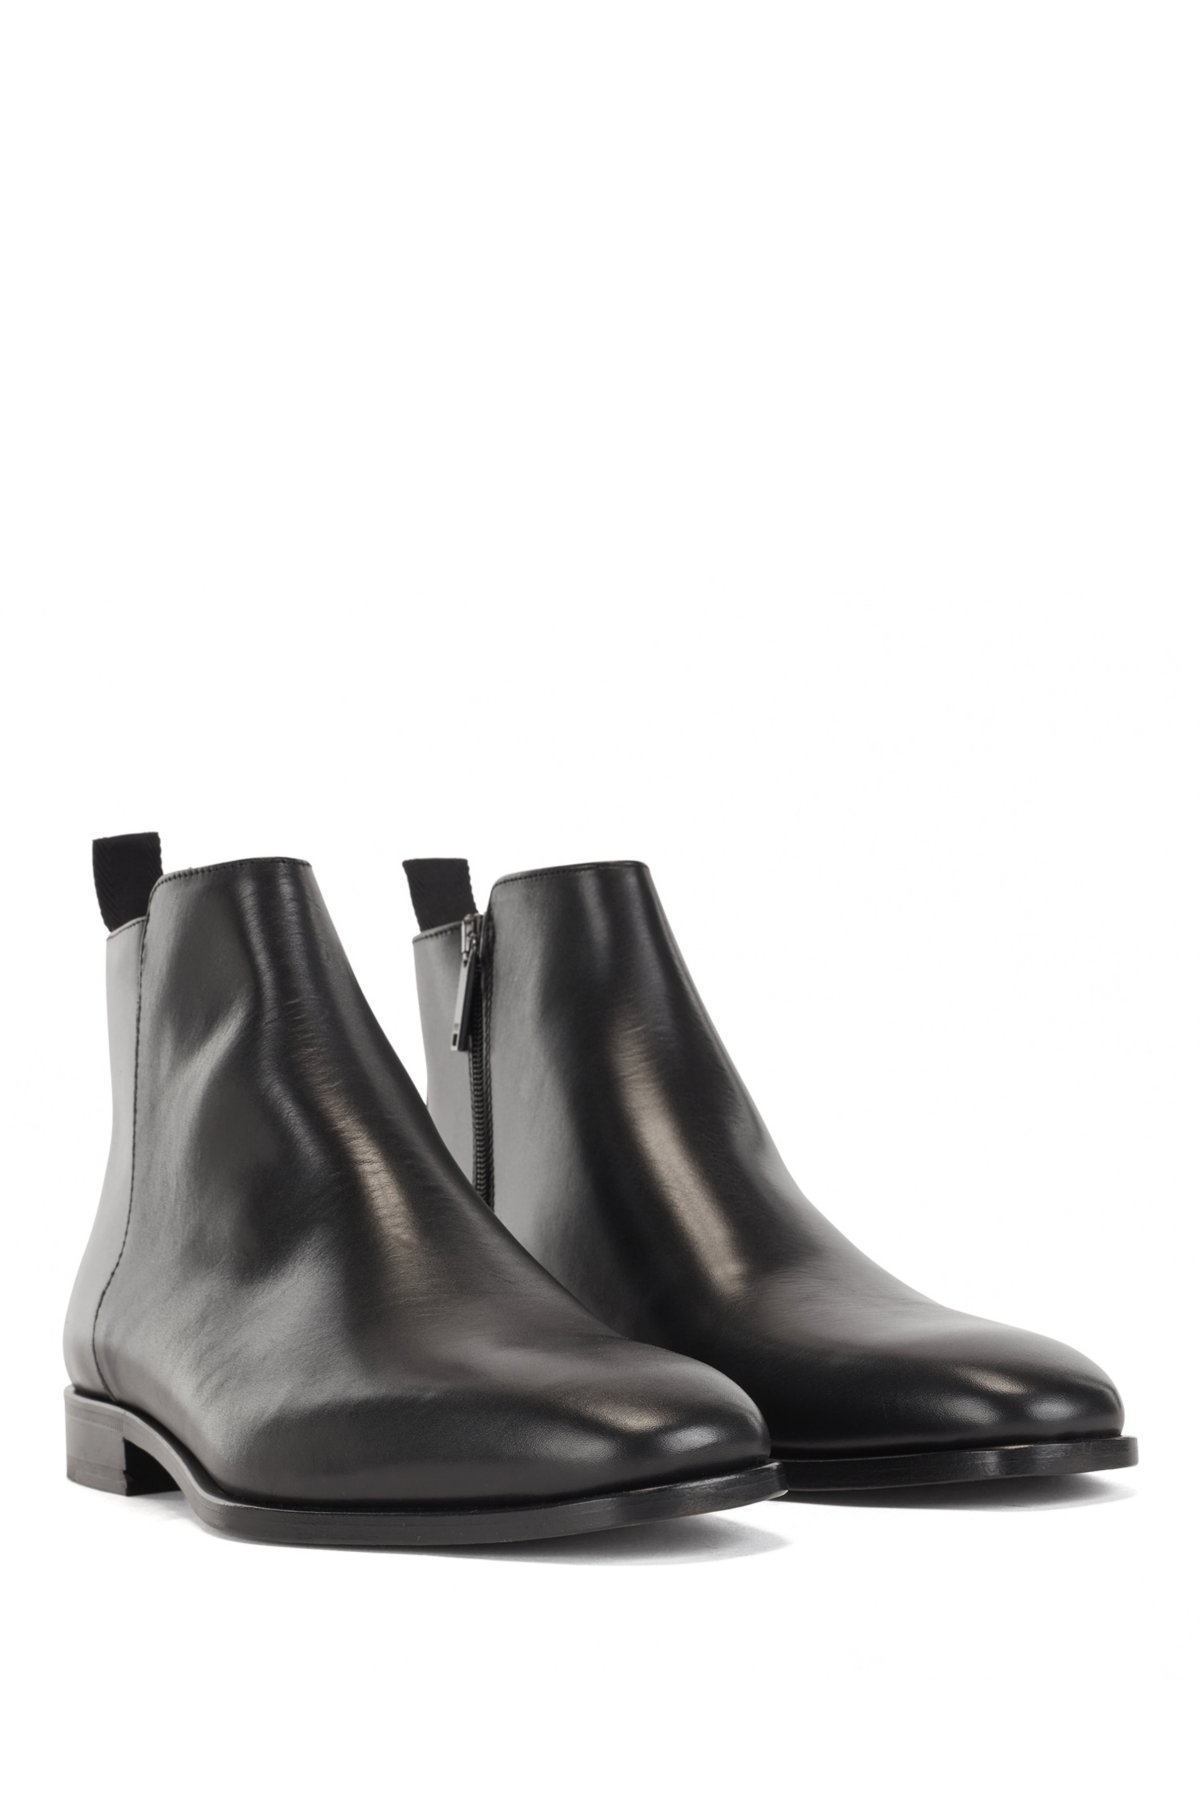 BOSS - Side-zip ankle boots in polished